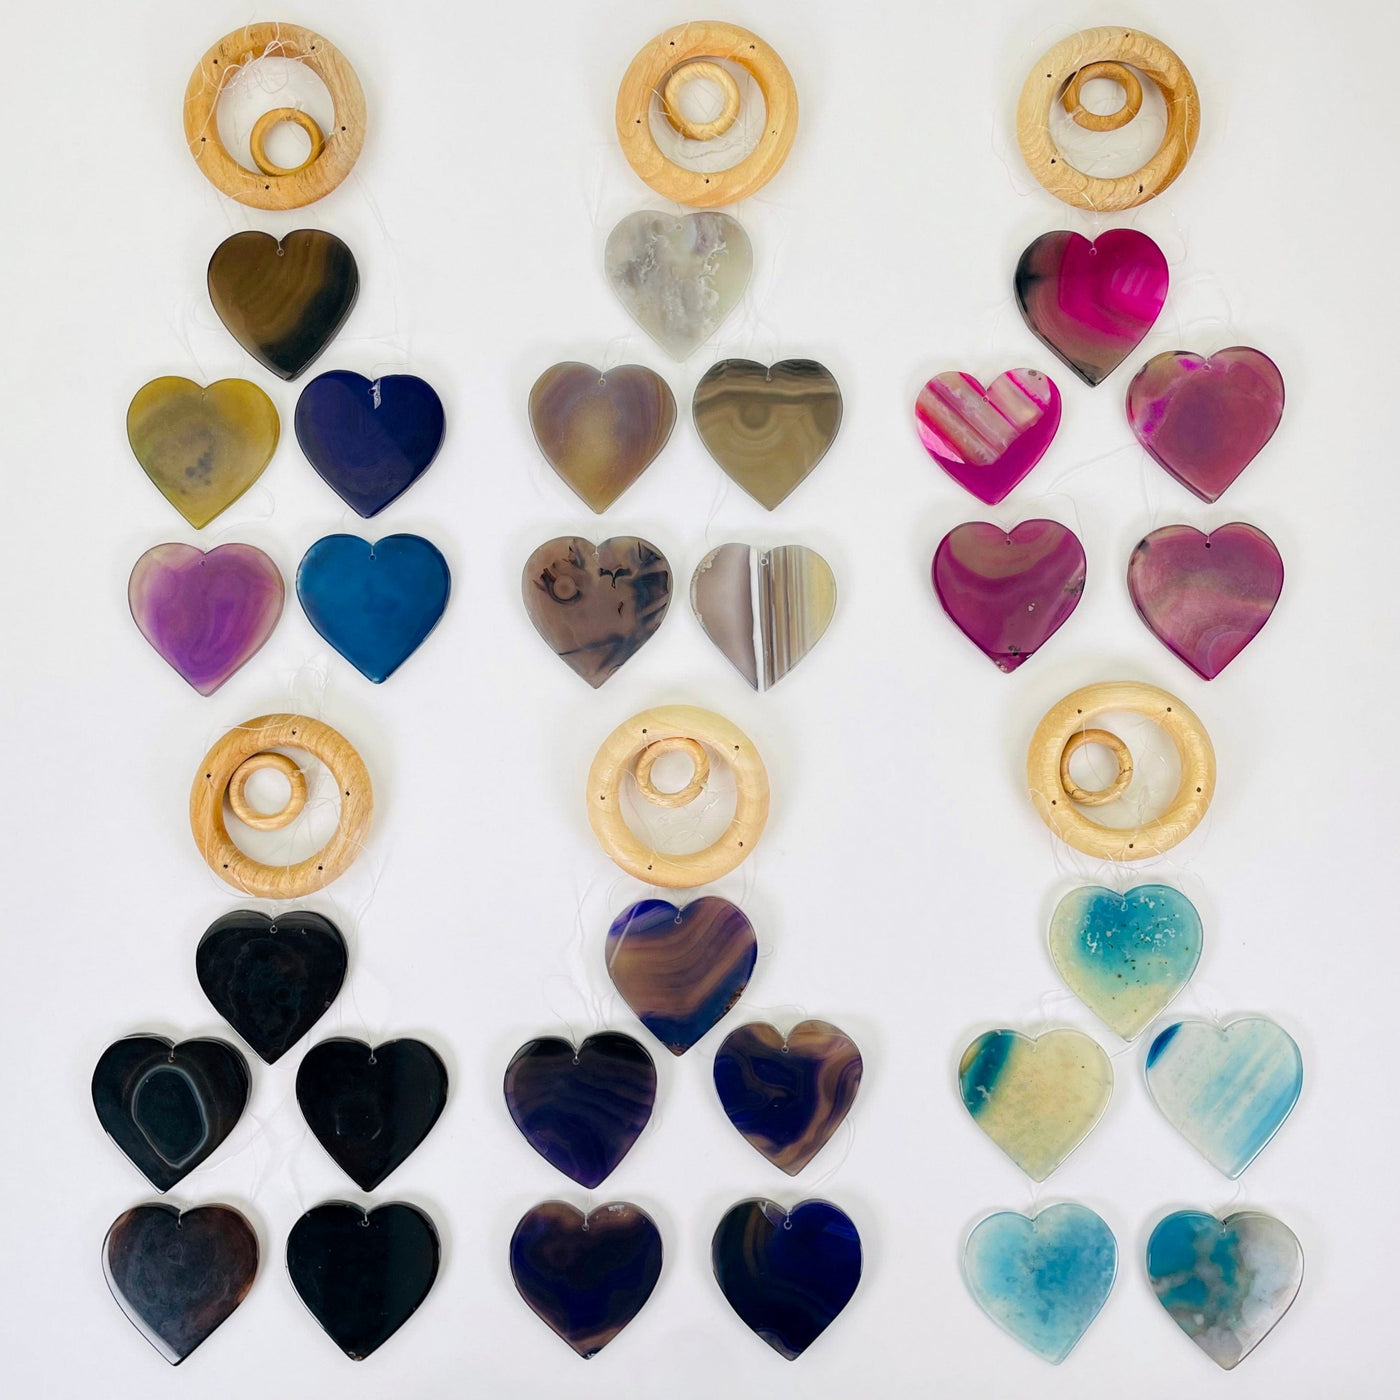 one of each agate heart wind chime options laying flat on white background